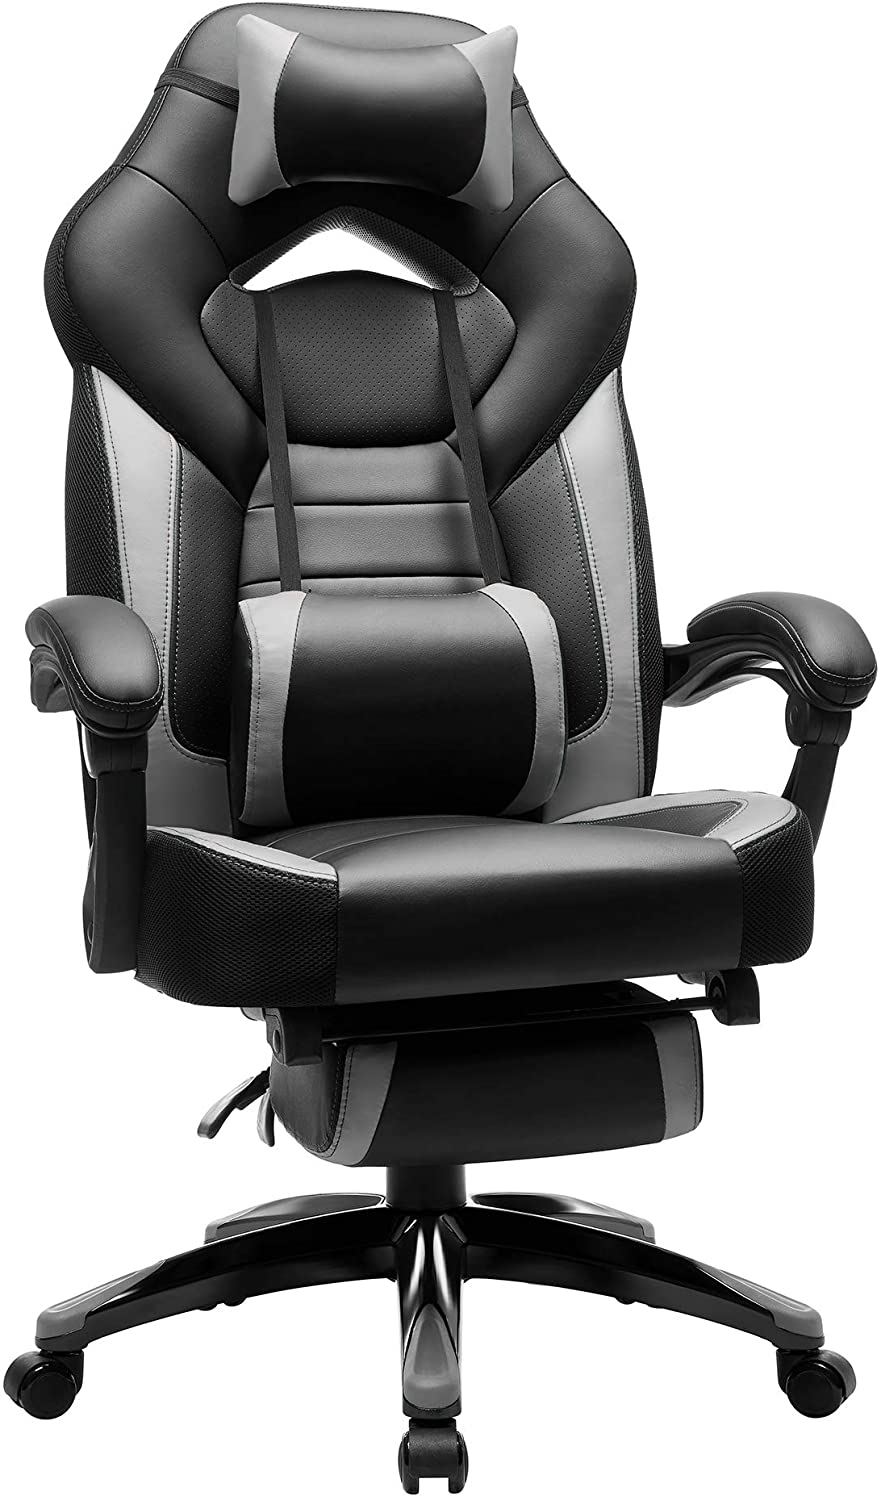 SONGMICS Gaming Chair, Office Racing Chair